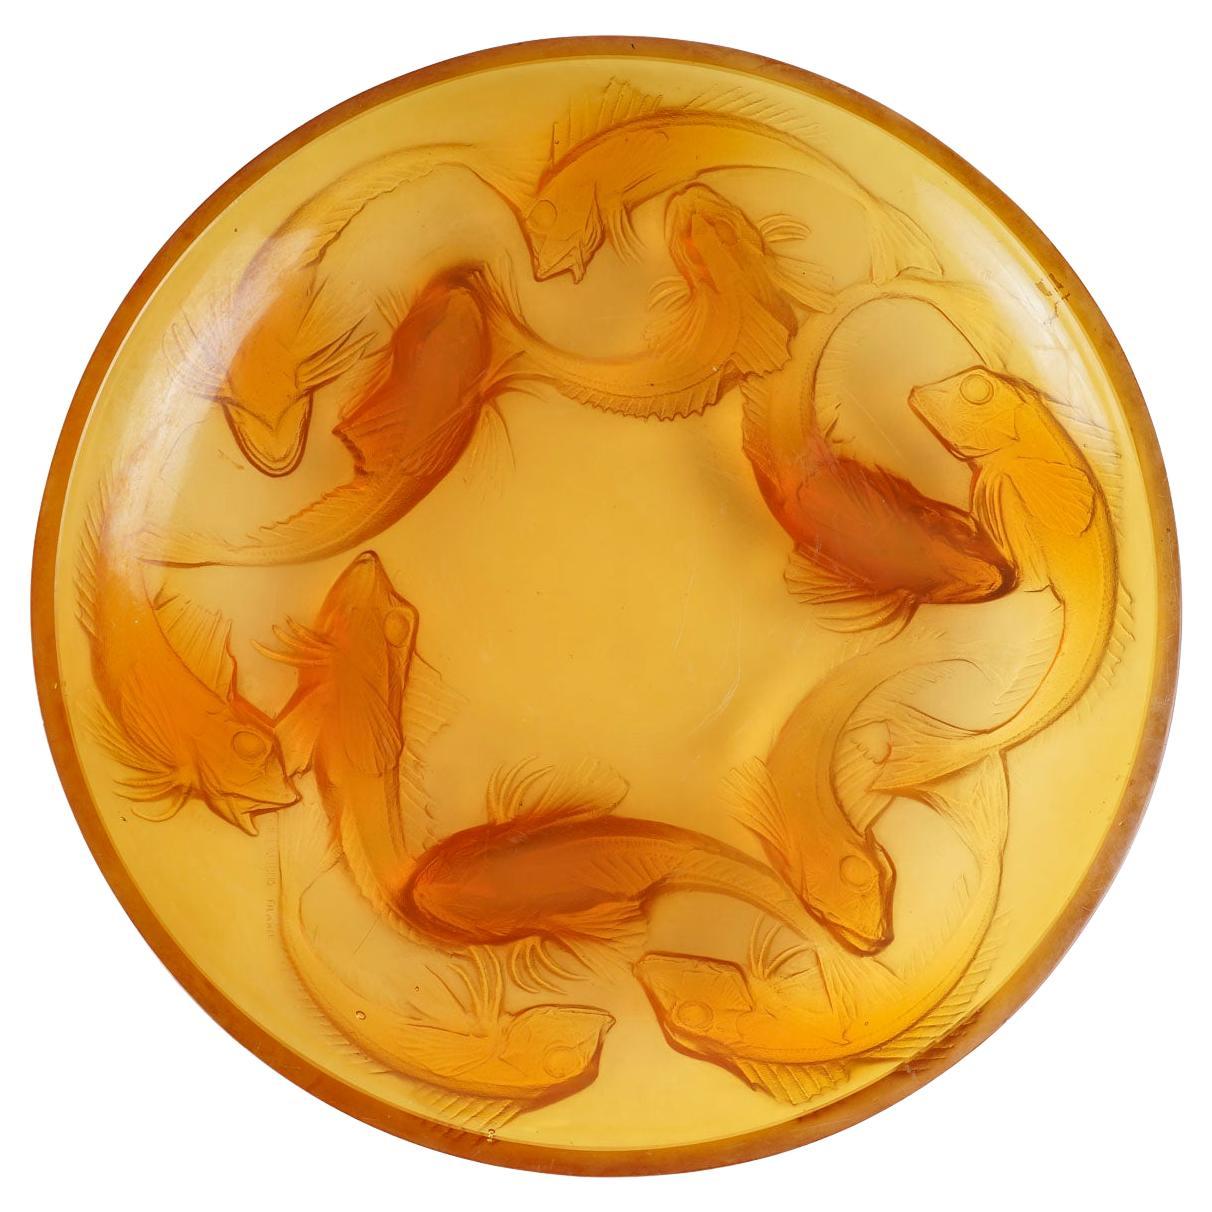 What type of glass is manufactured at Lalique?